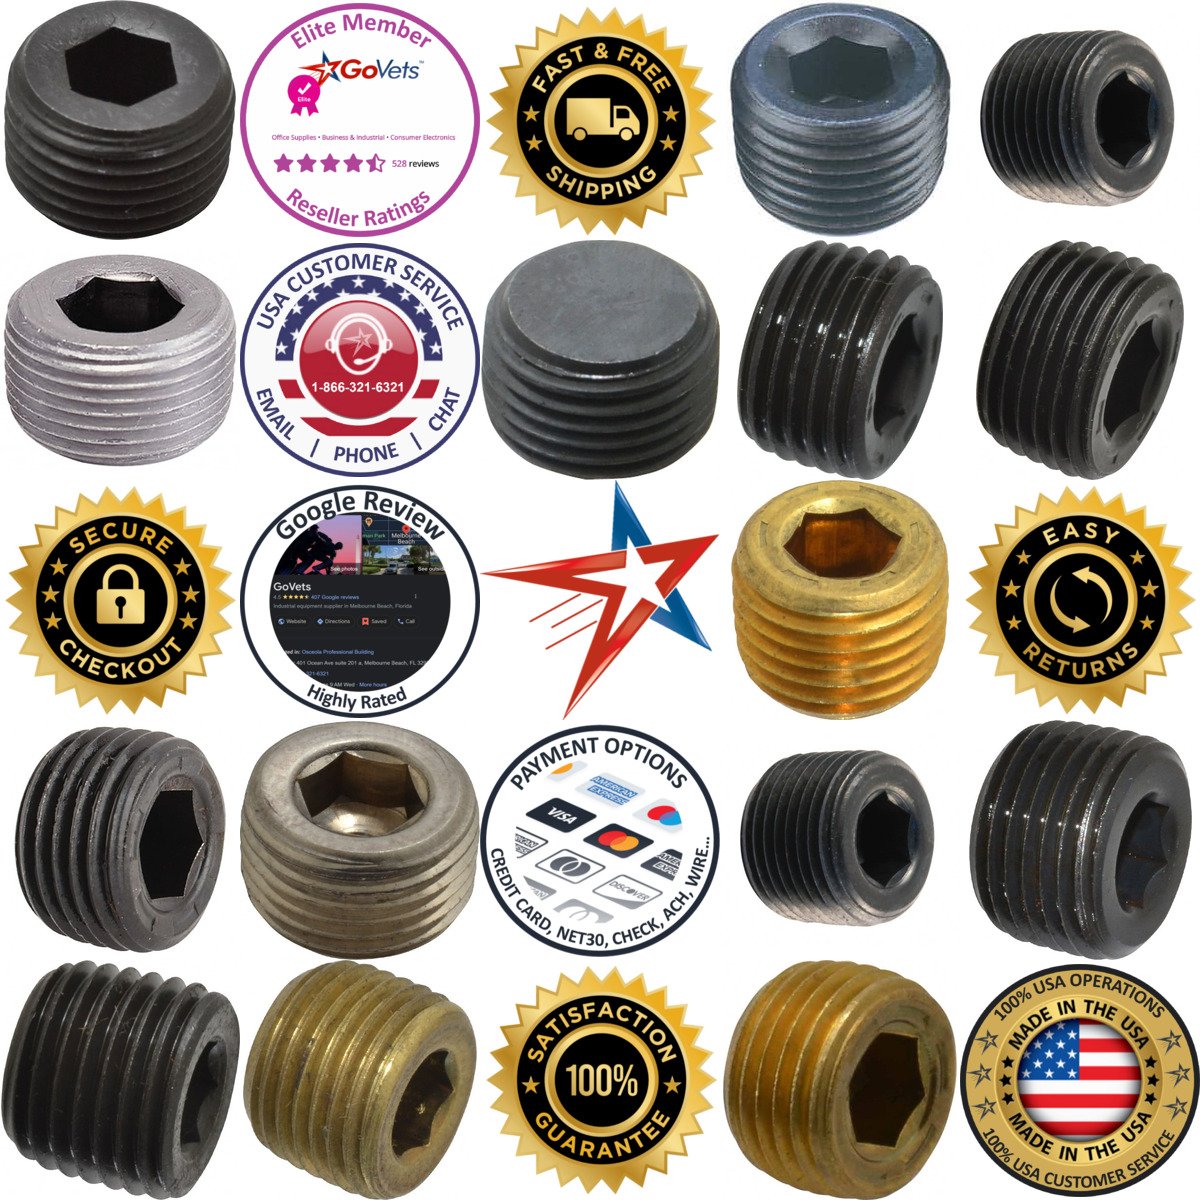 A selection of Socket Pressure Plugs products on GoVets